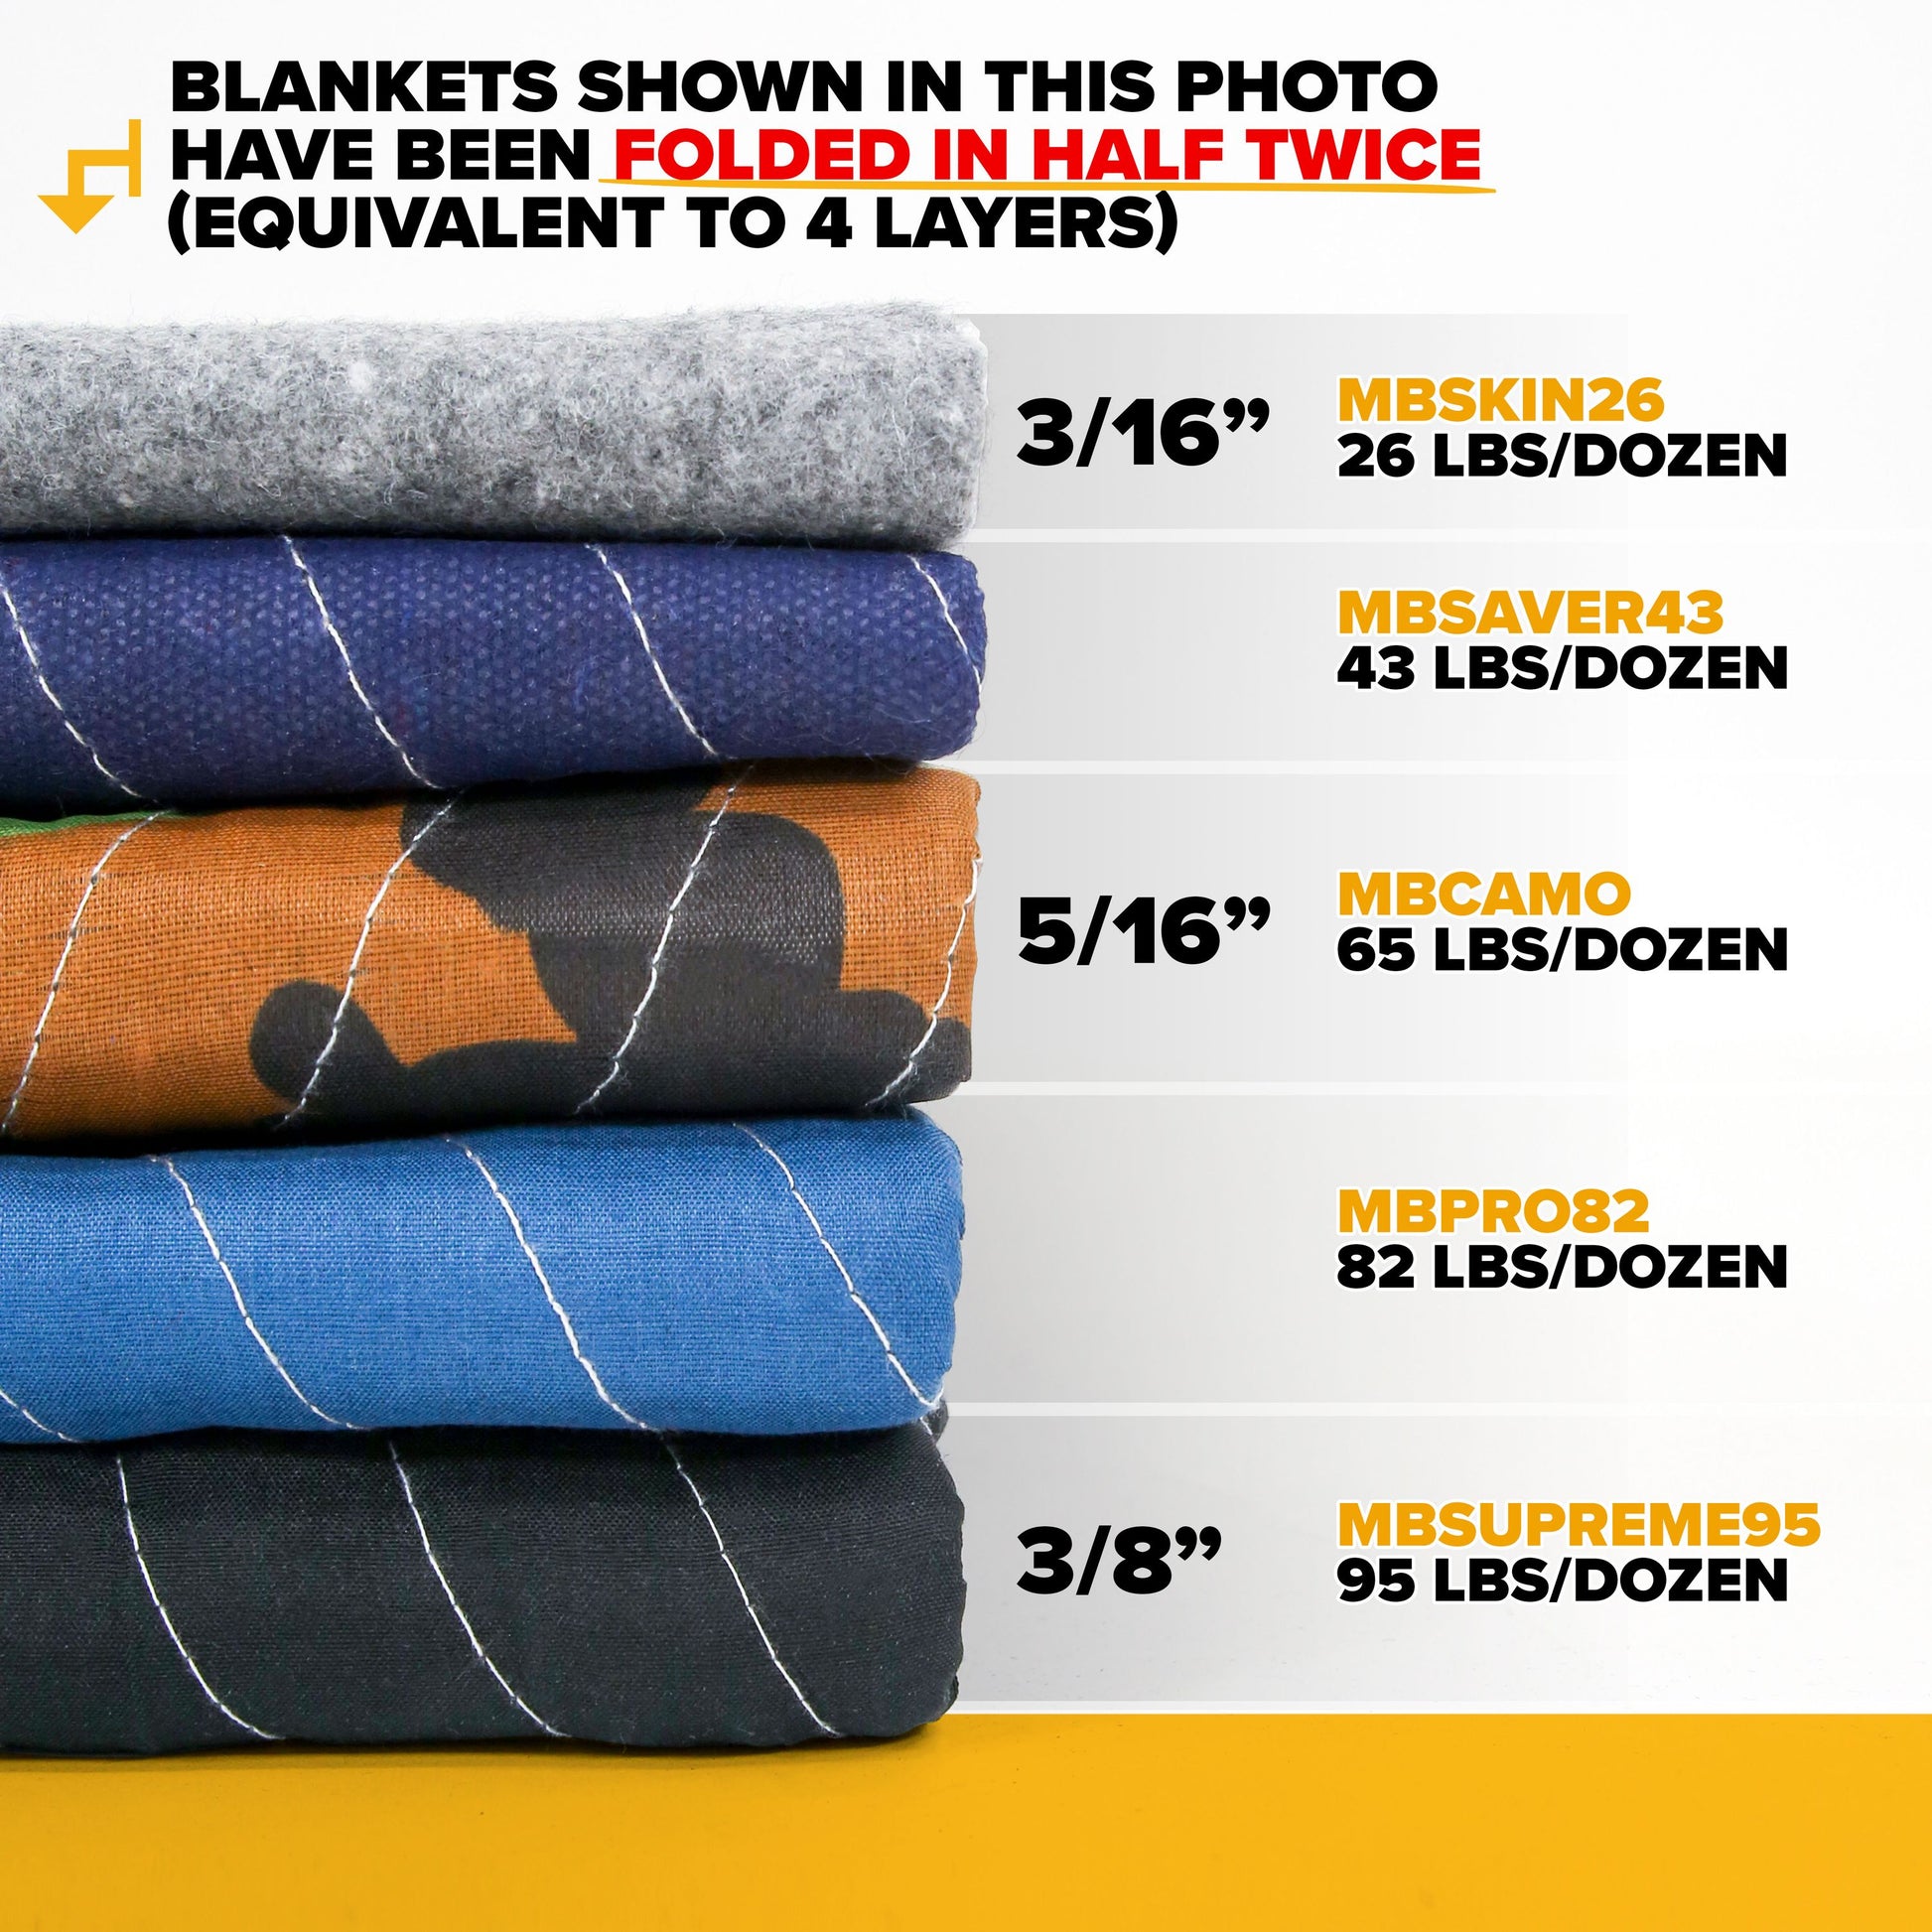 Moving Blankets- Supreme Mover 12-Pack, 90-95 lbs./dozen image 5 of 11